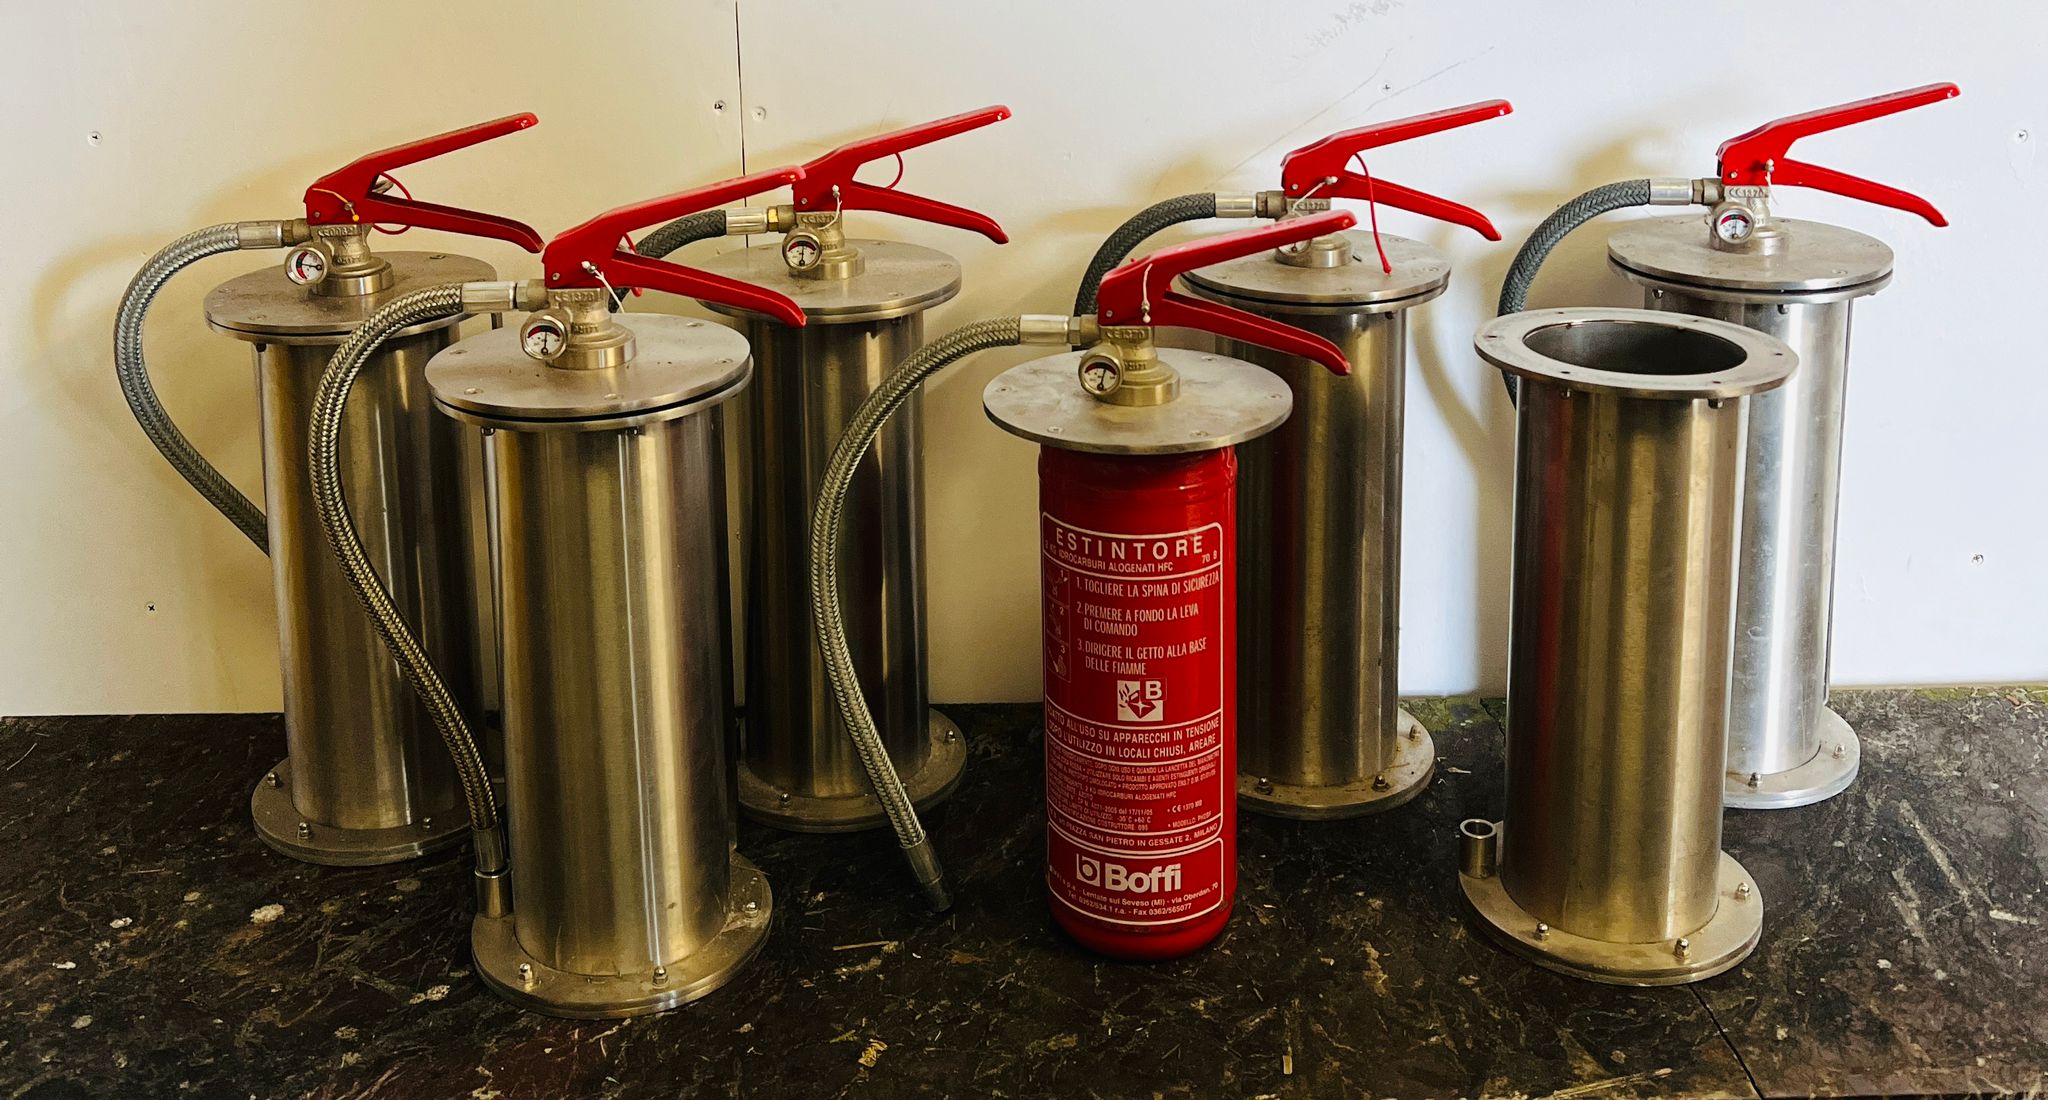 Six floor extinguishers in a stainless steel carcass by Boffi